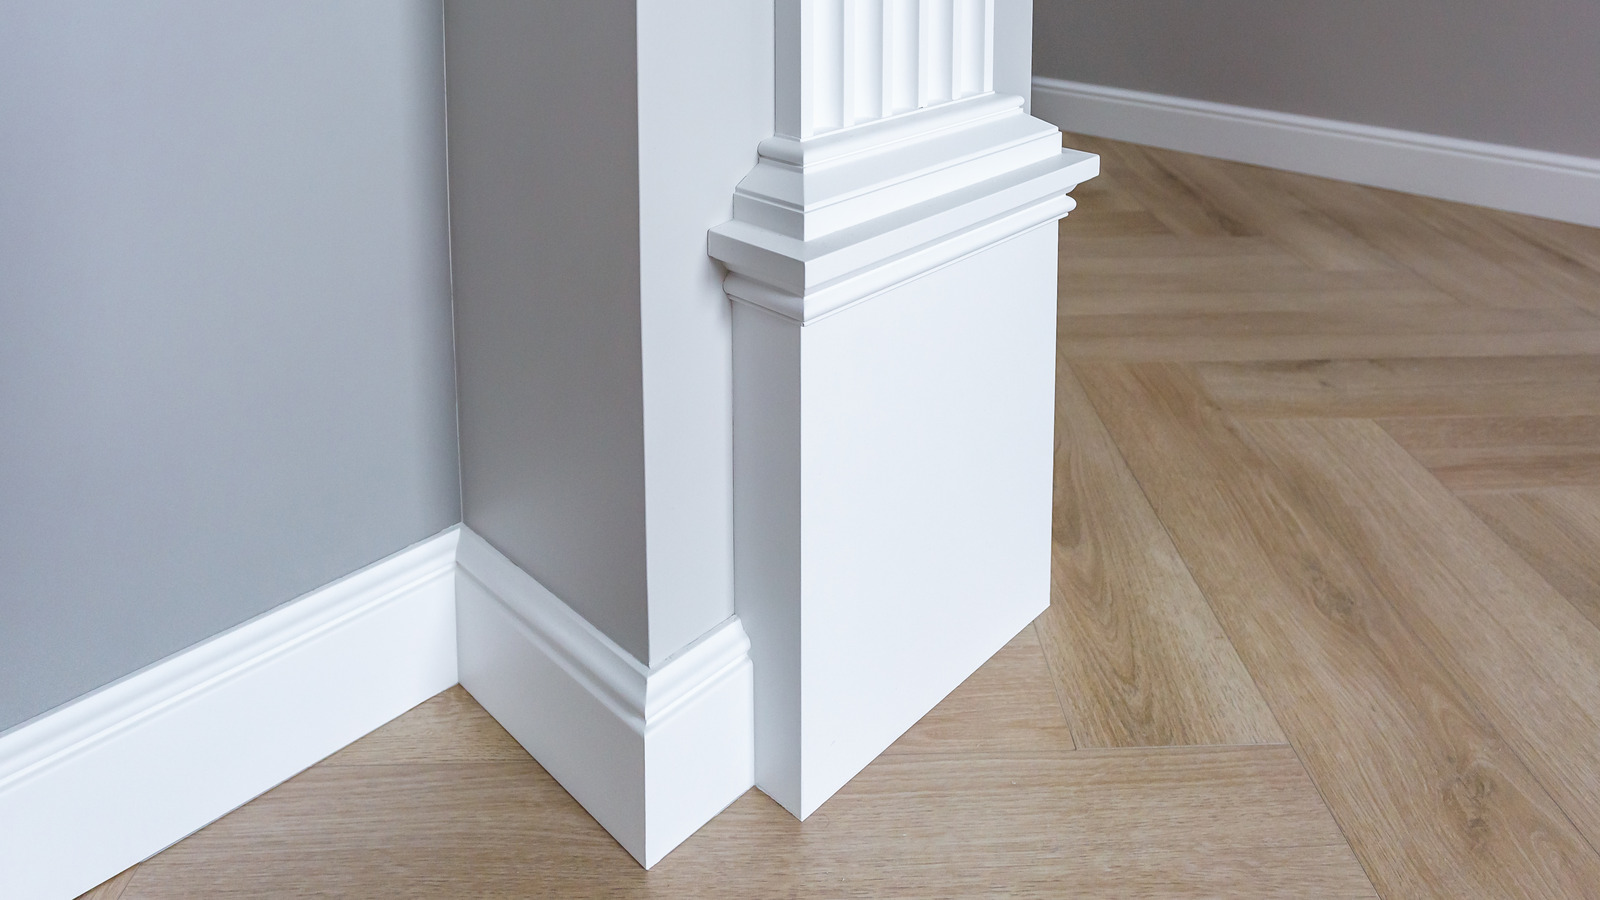 What Is The Best Way To Clean Commercial Baseboards?